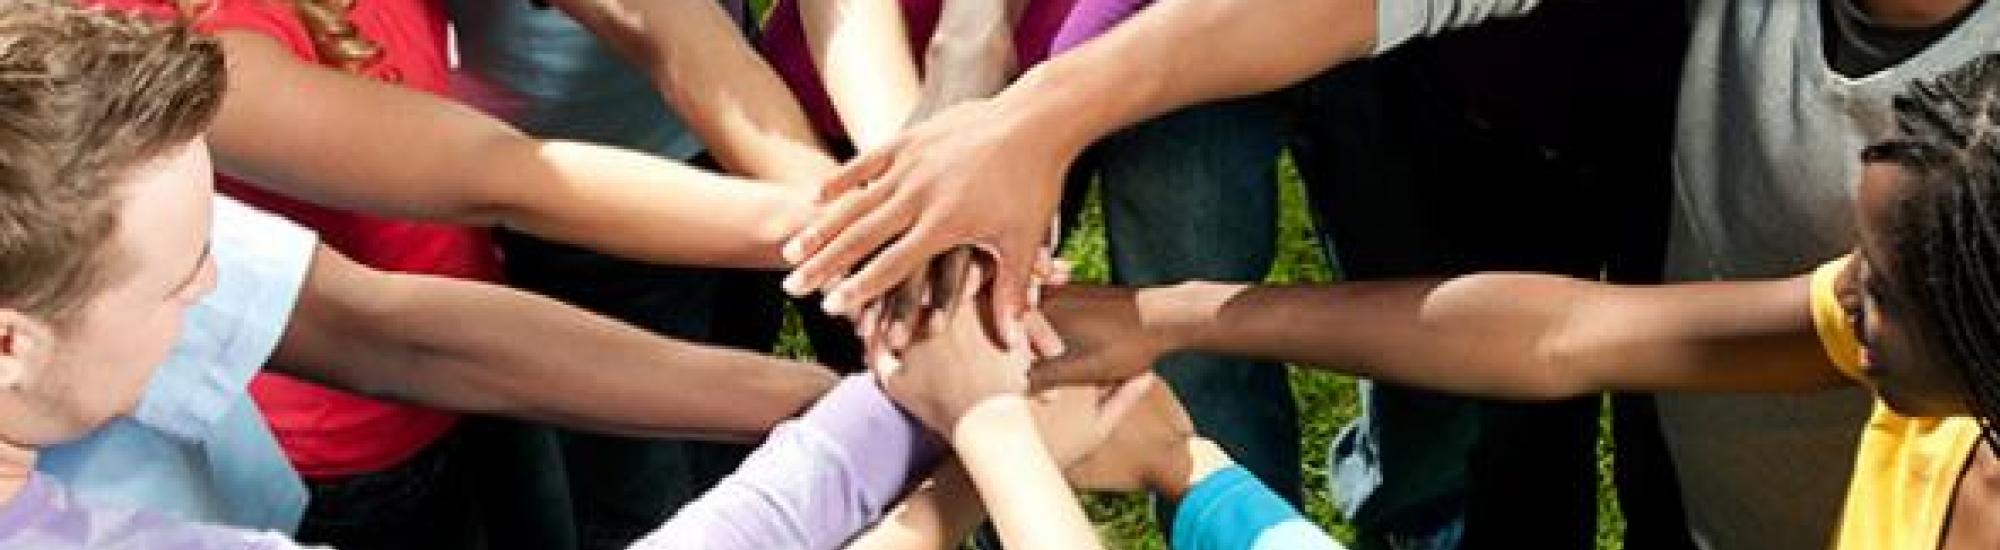 Circle of people of various races placing their hands upon each others hands.